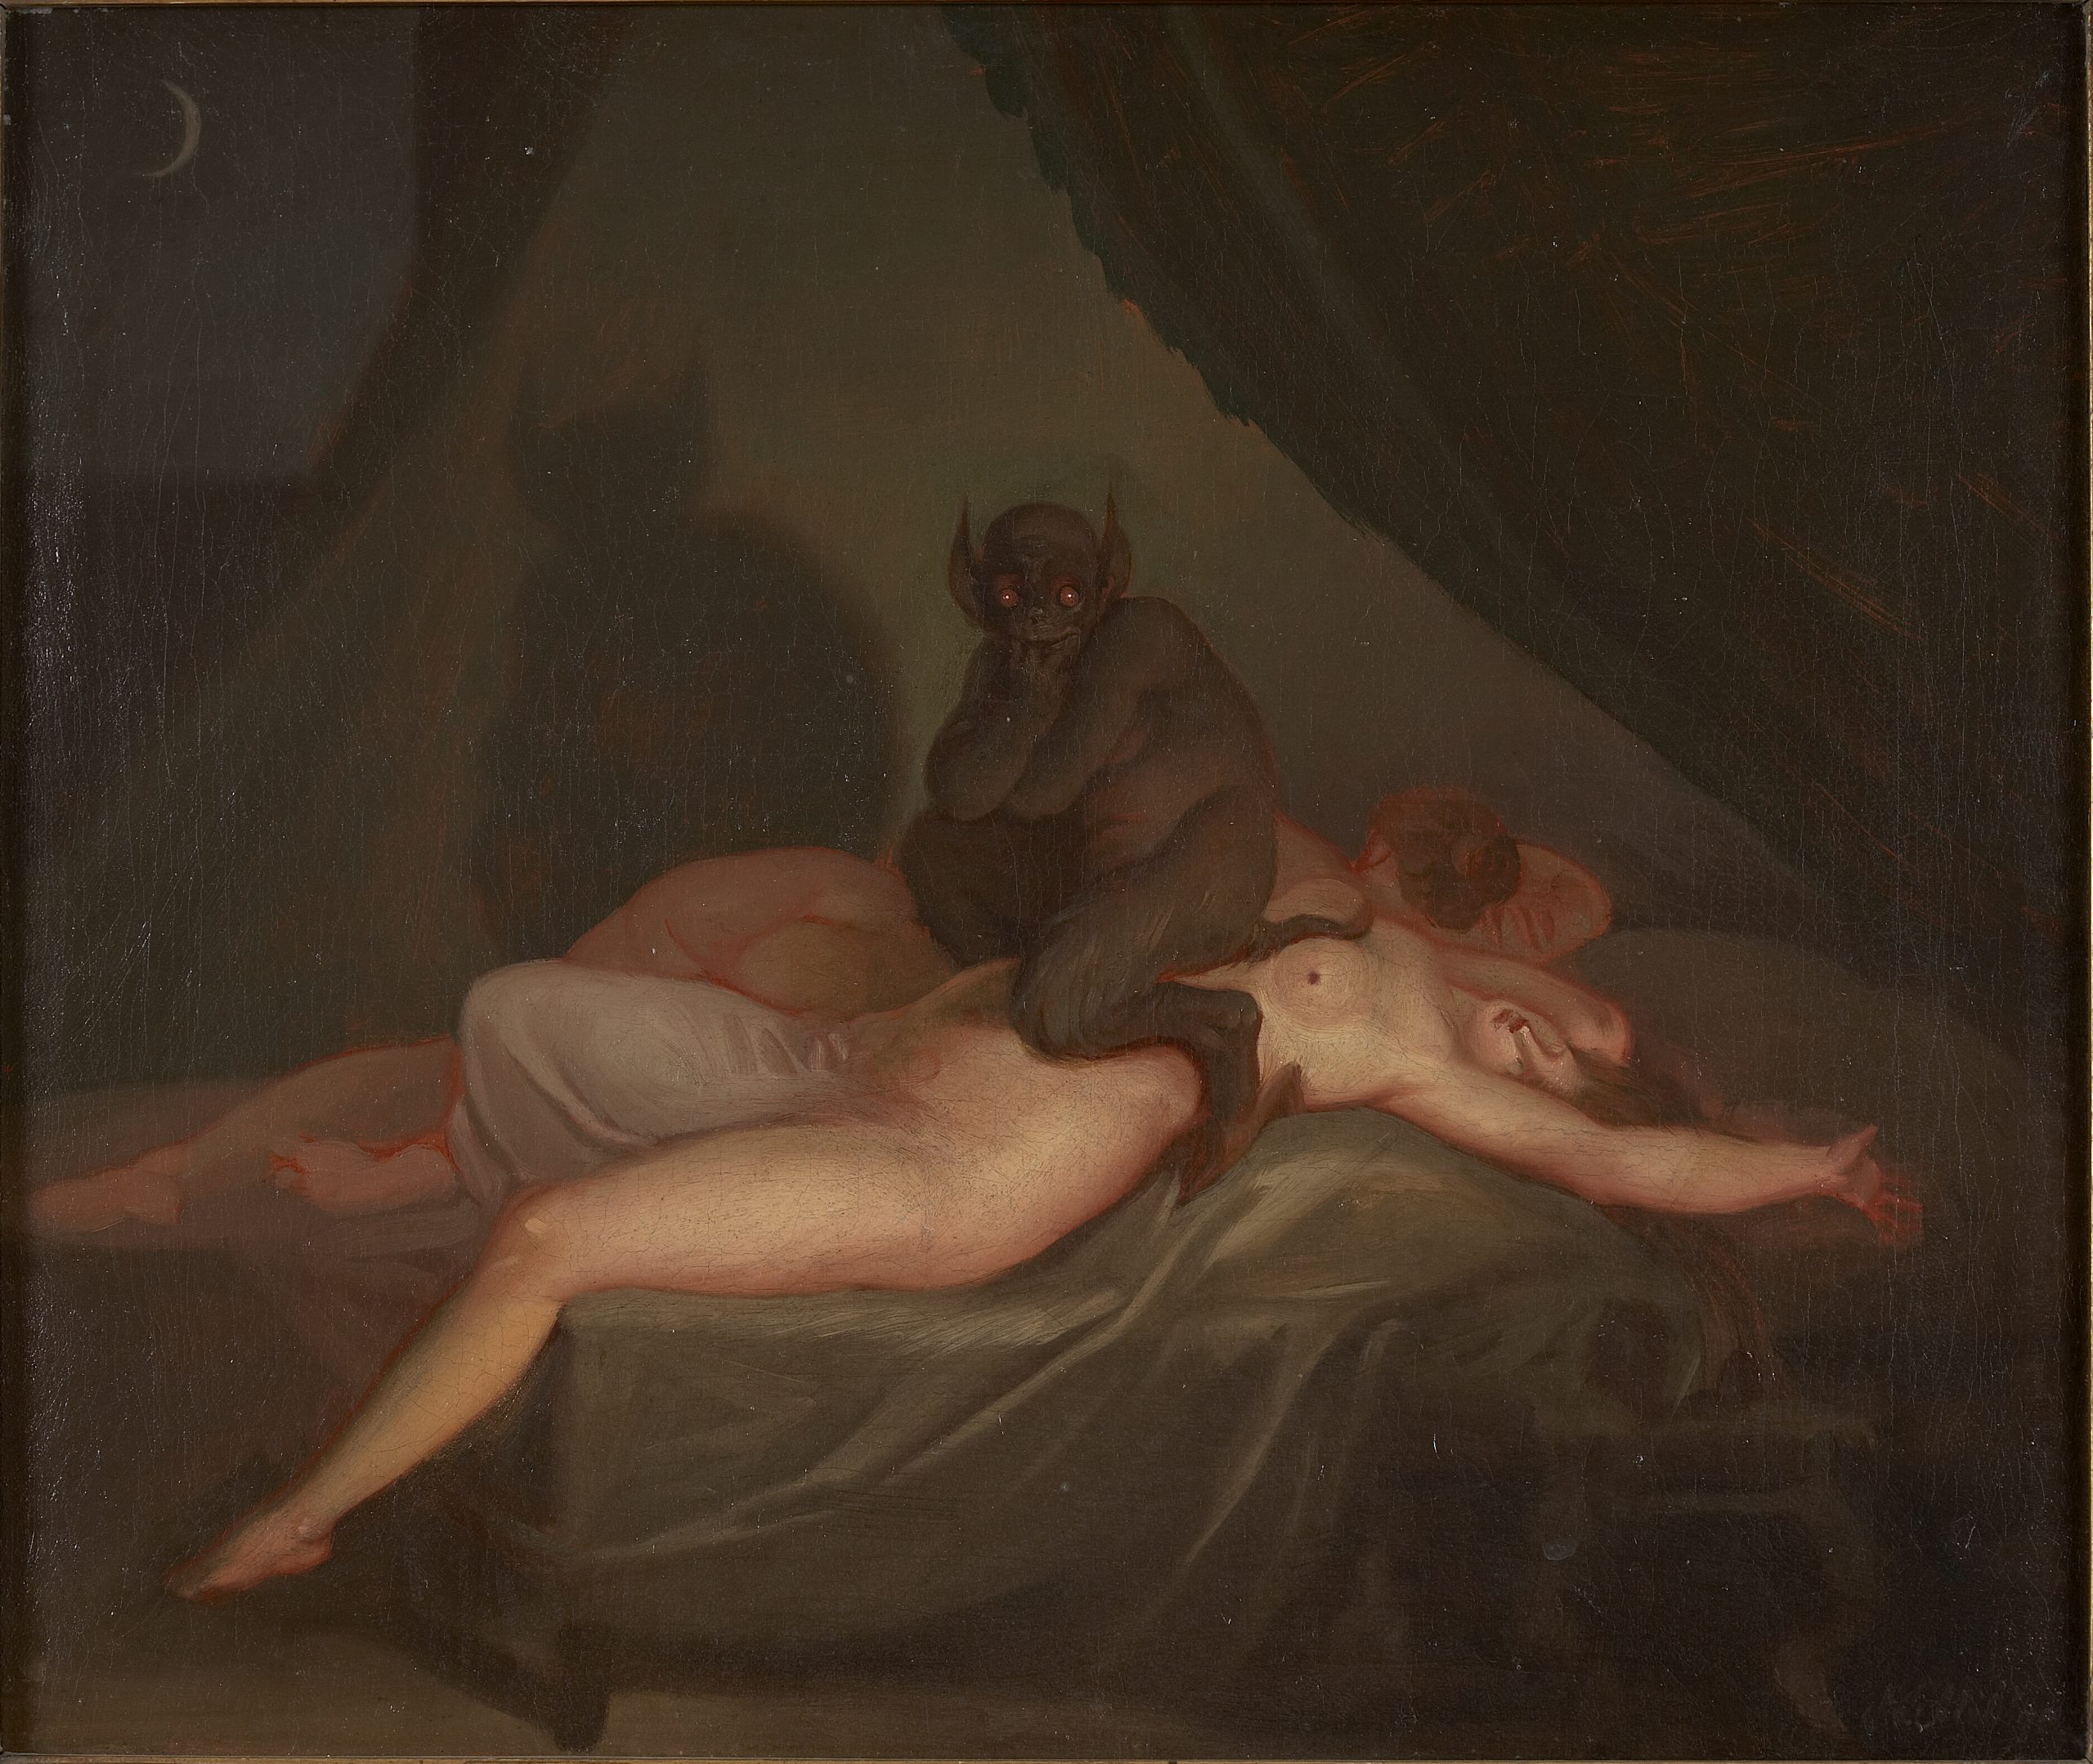 Nightmare is a chilling masterpiece by Nicolai Abraham Abildgaard that depicts two women: one peacefully asleep, the other locked in a nightmare | Academia Aesthetics